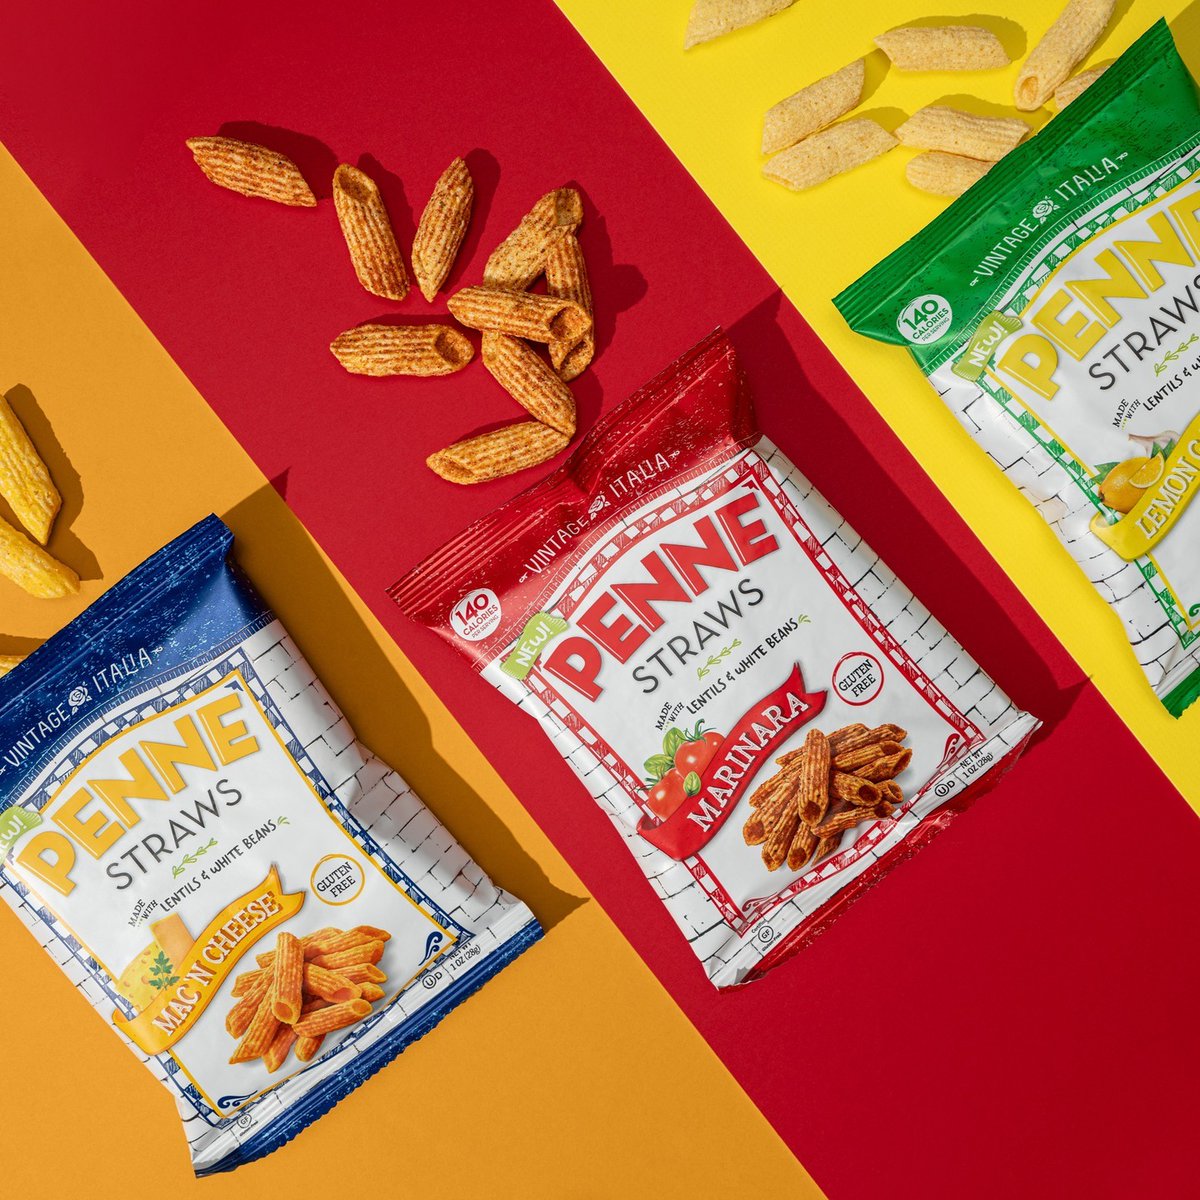 Pasta on the go? Count me in! These bite-sized wonders are perfect for any craving. 🍝👌 #PastaPerfection #PenneStraws #PastaSnacks